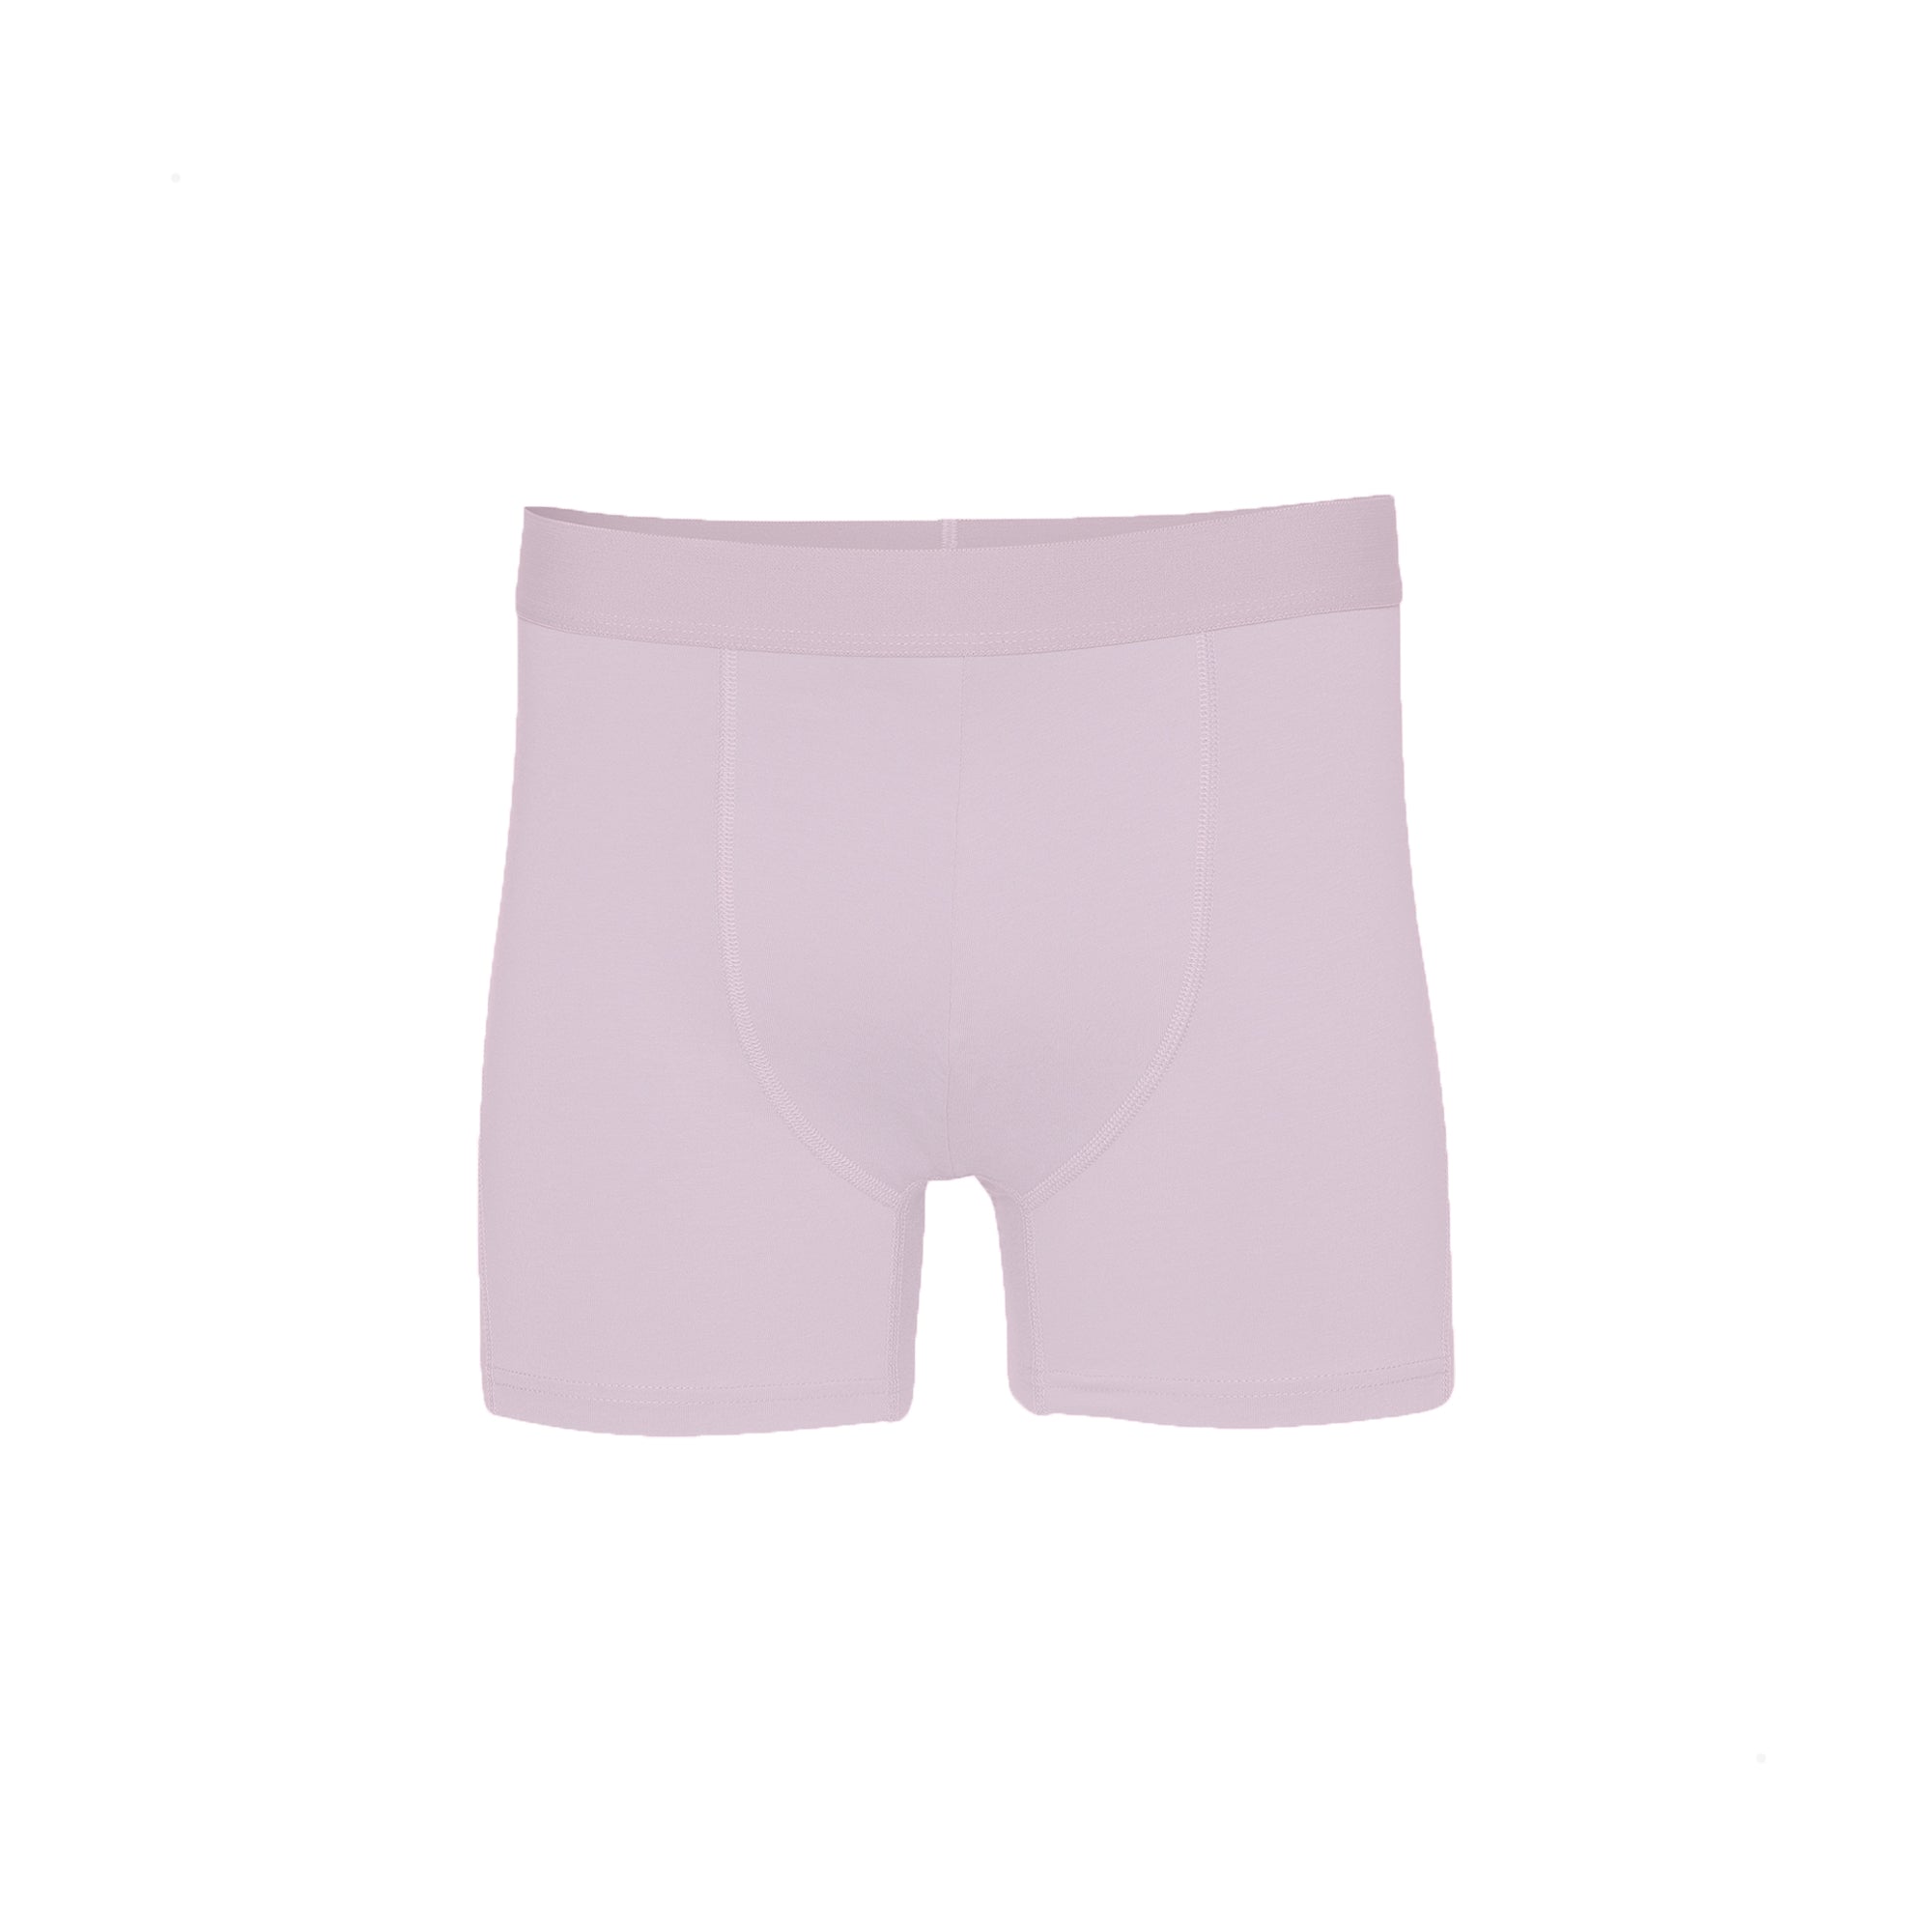 Colorful Standard Organic Cotton Boxers - Faded Pink